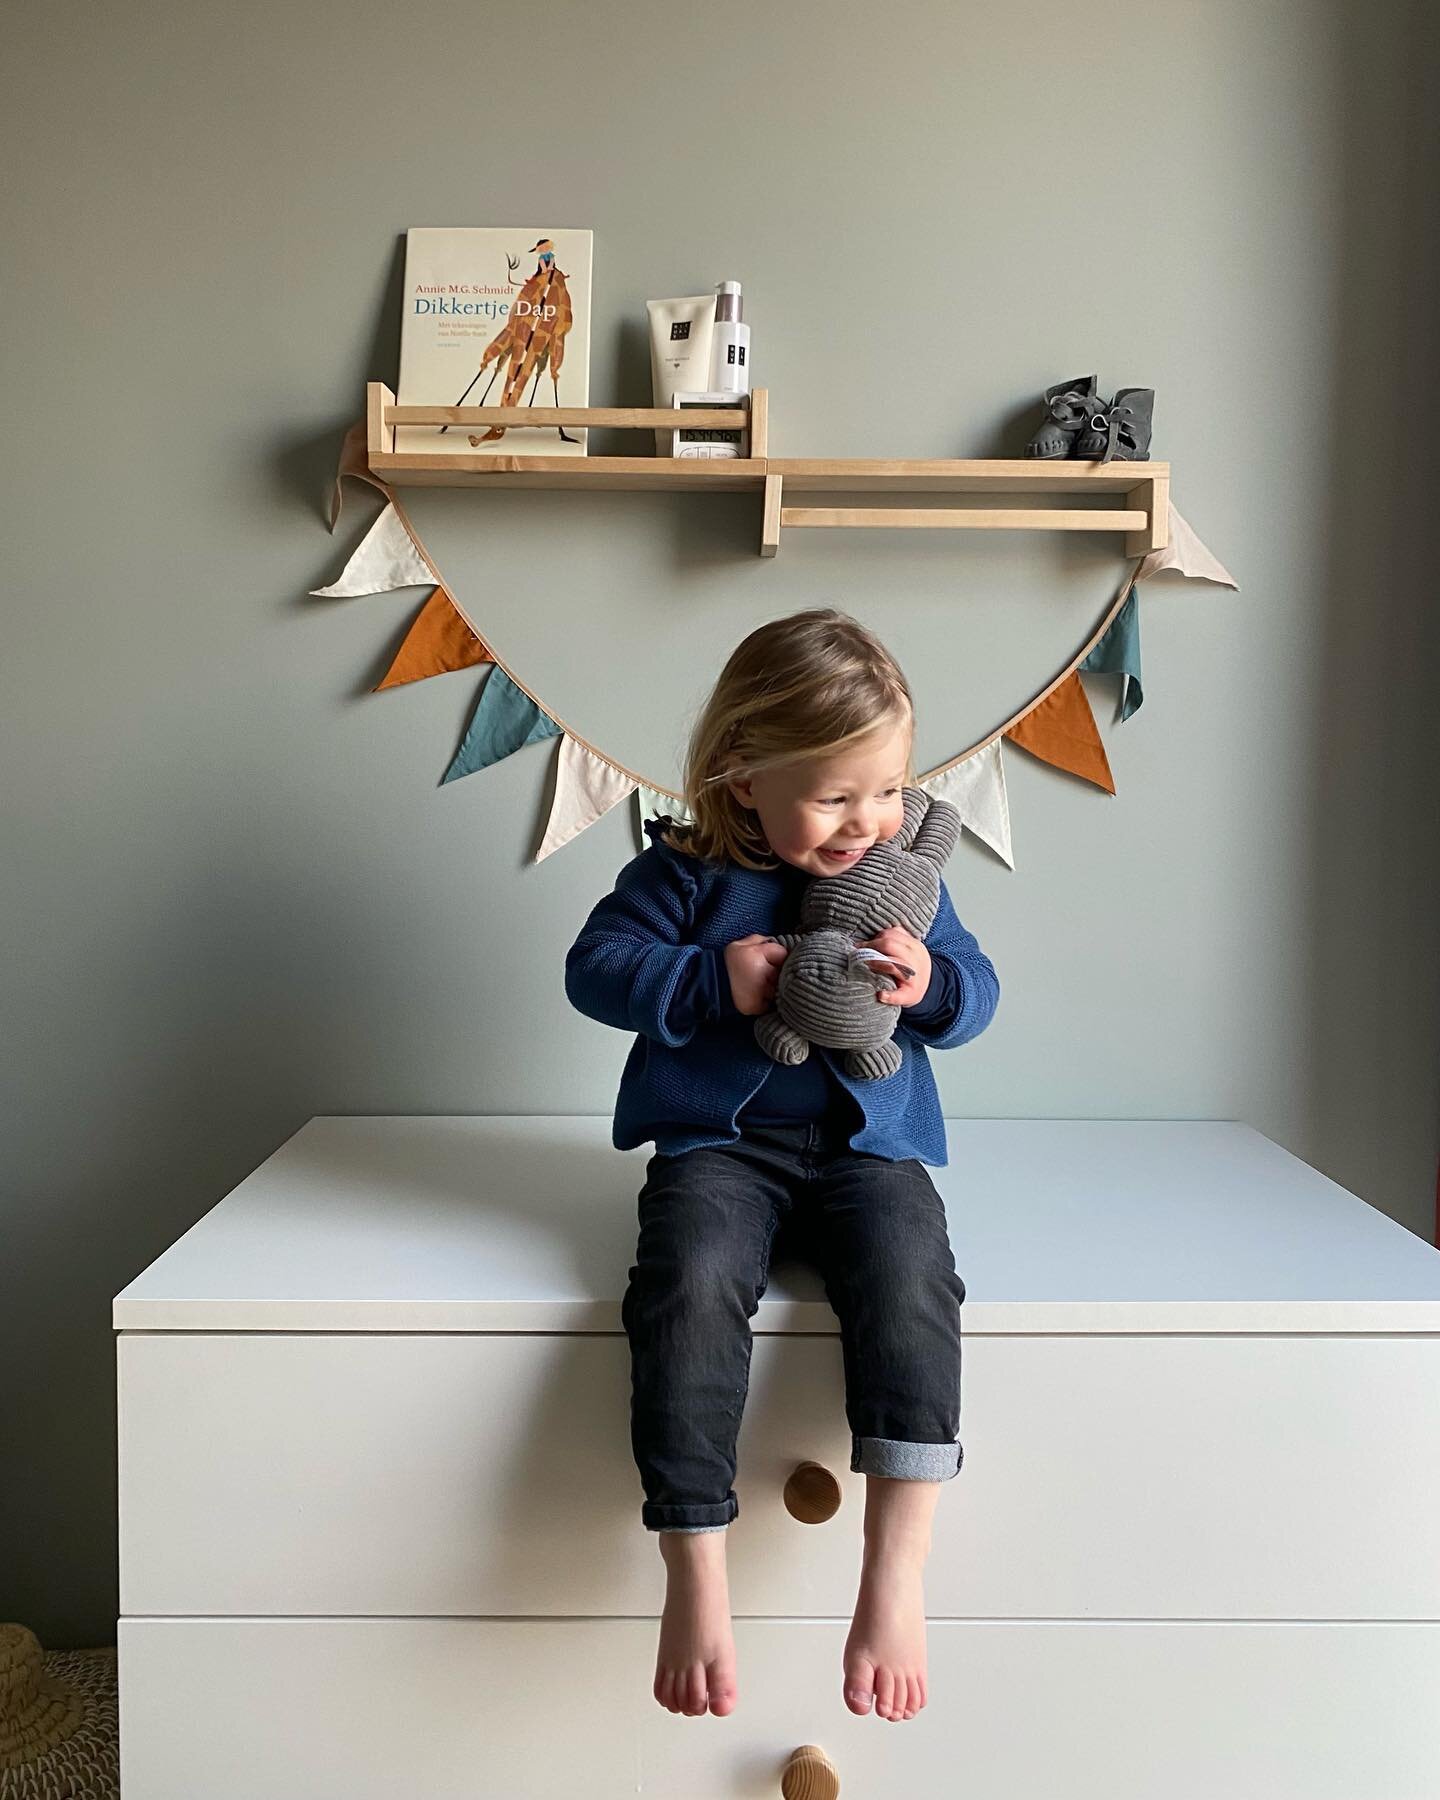 I&rsquo;m not the only one who&rsquo;s happy with the new colour in the nursery. 

#interiorinspiration #babyroomideas #nursery #nurserydecor #kidsdecor #babyroom #farrowandballlightblue #farrowandball #babykamer #babykamerinspiratie #babykamerdecora